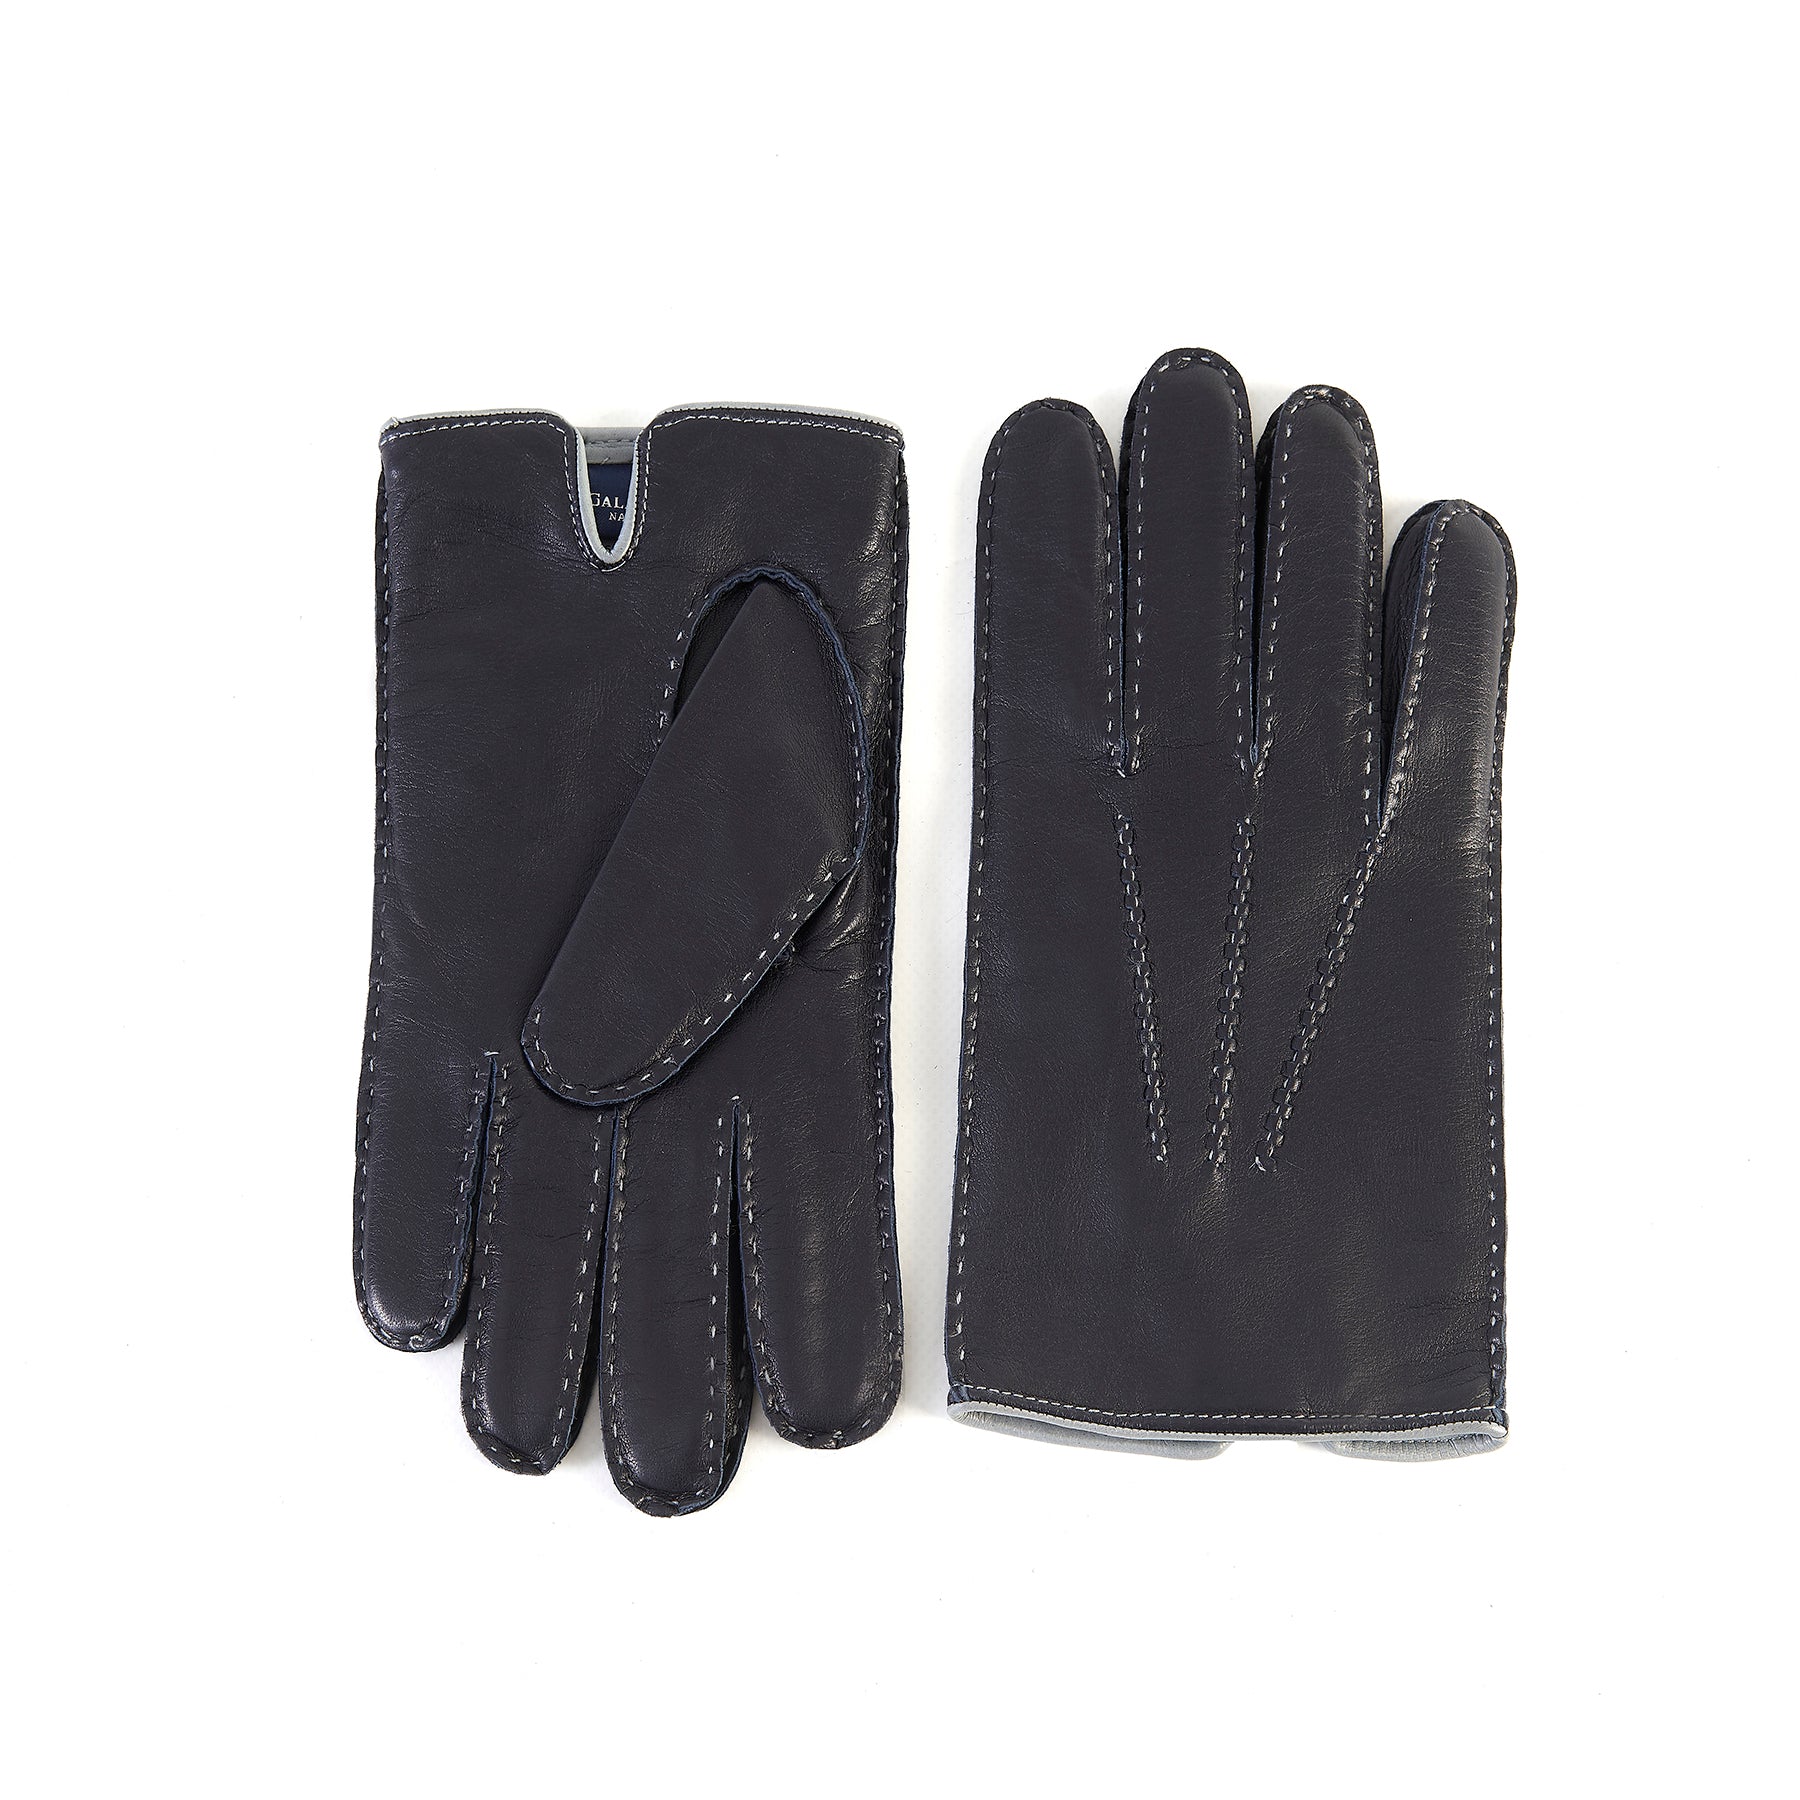 Men's fully hand-stitched blue nappa leather gloves and cashmere lining